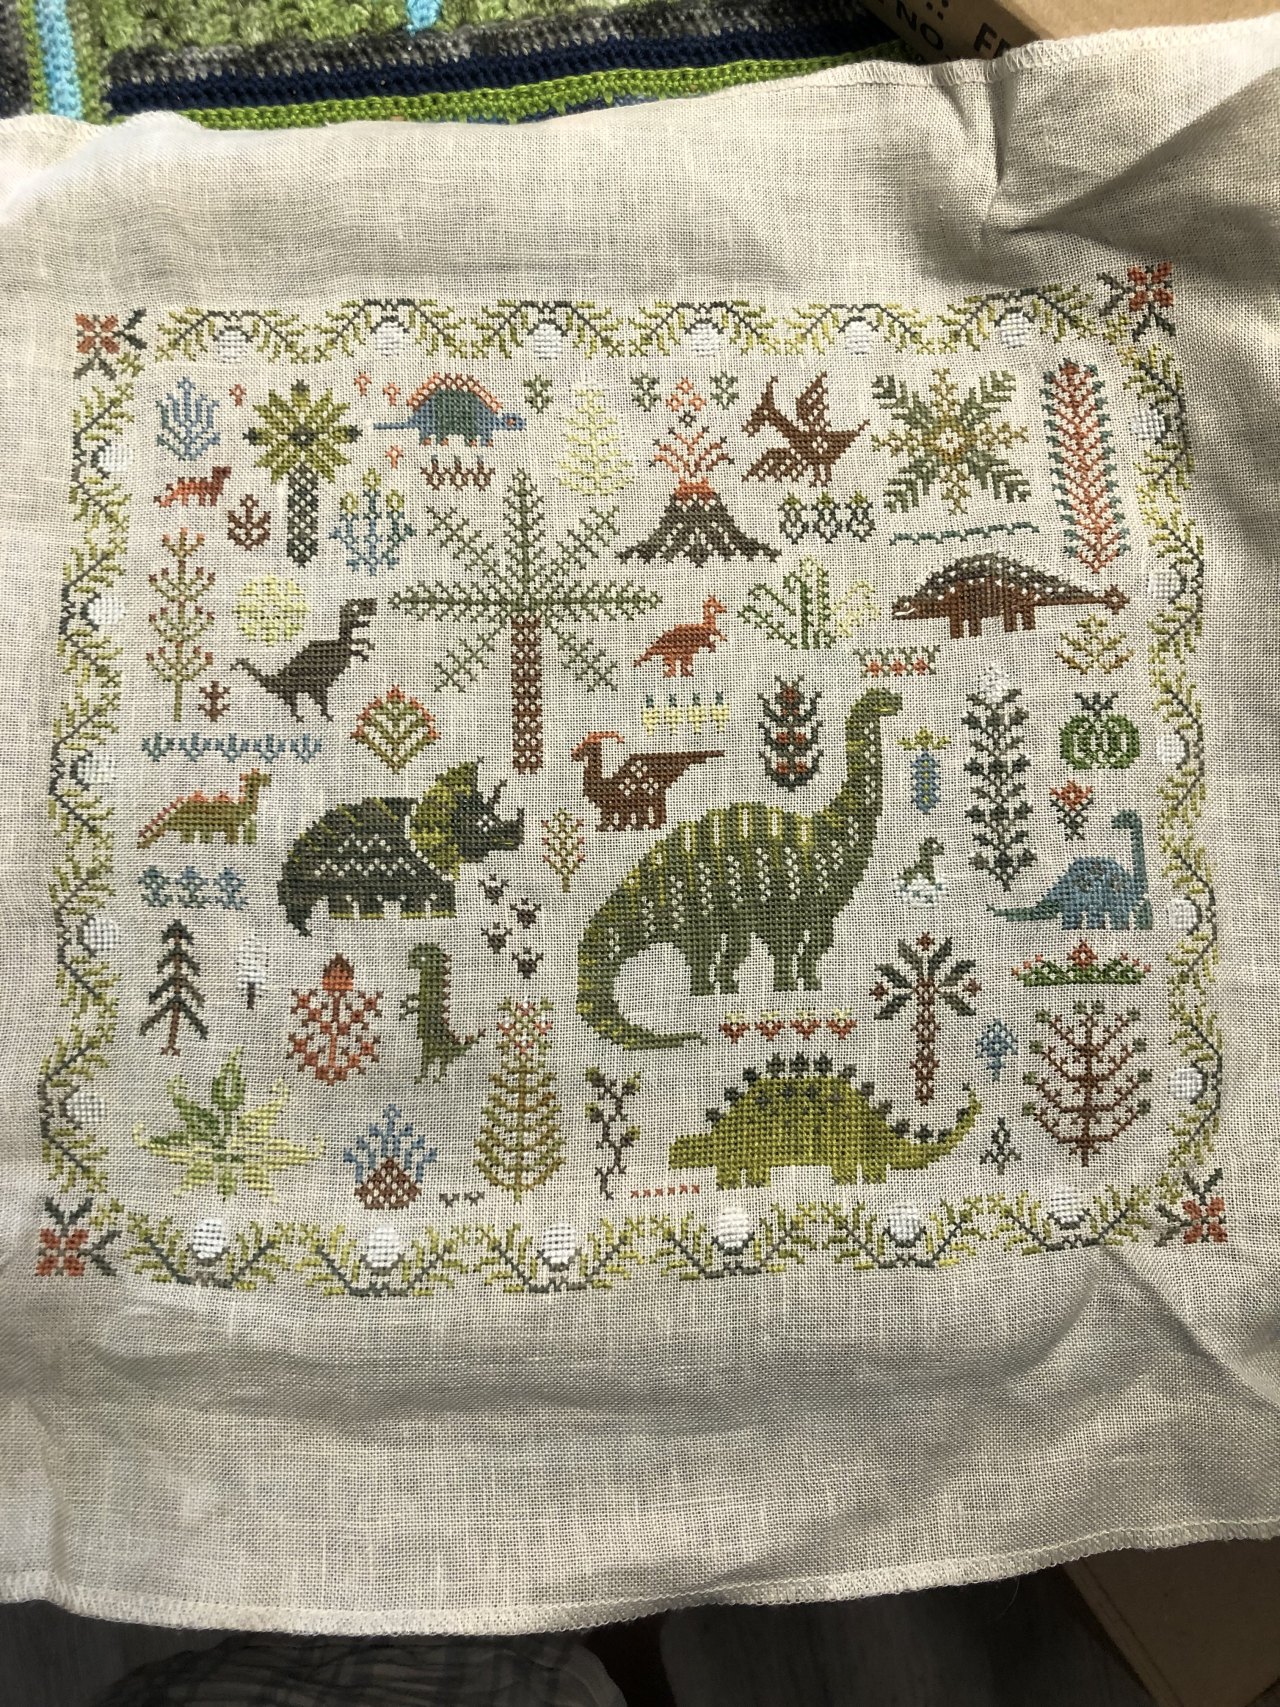 2 and half months ago i got back into cross stitching. Today i finished the project I started back&hellip;